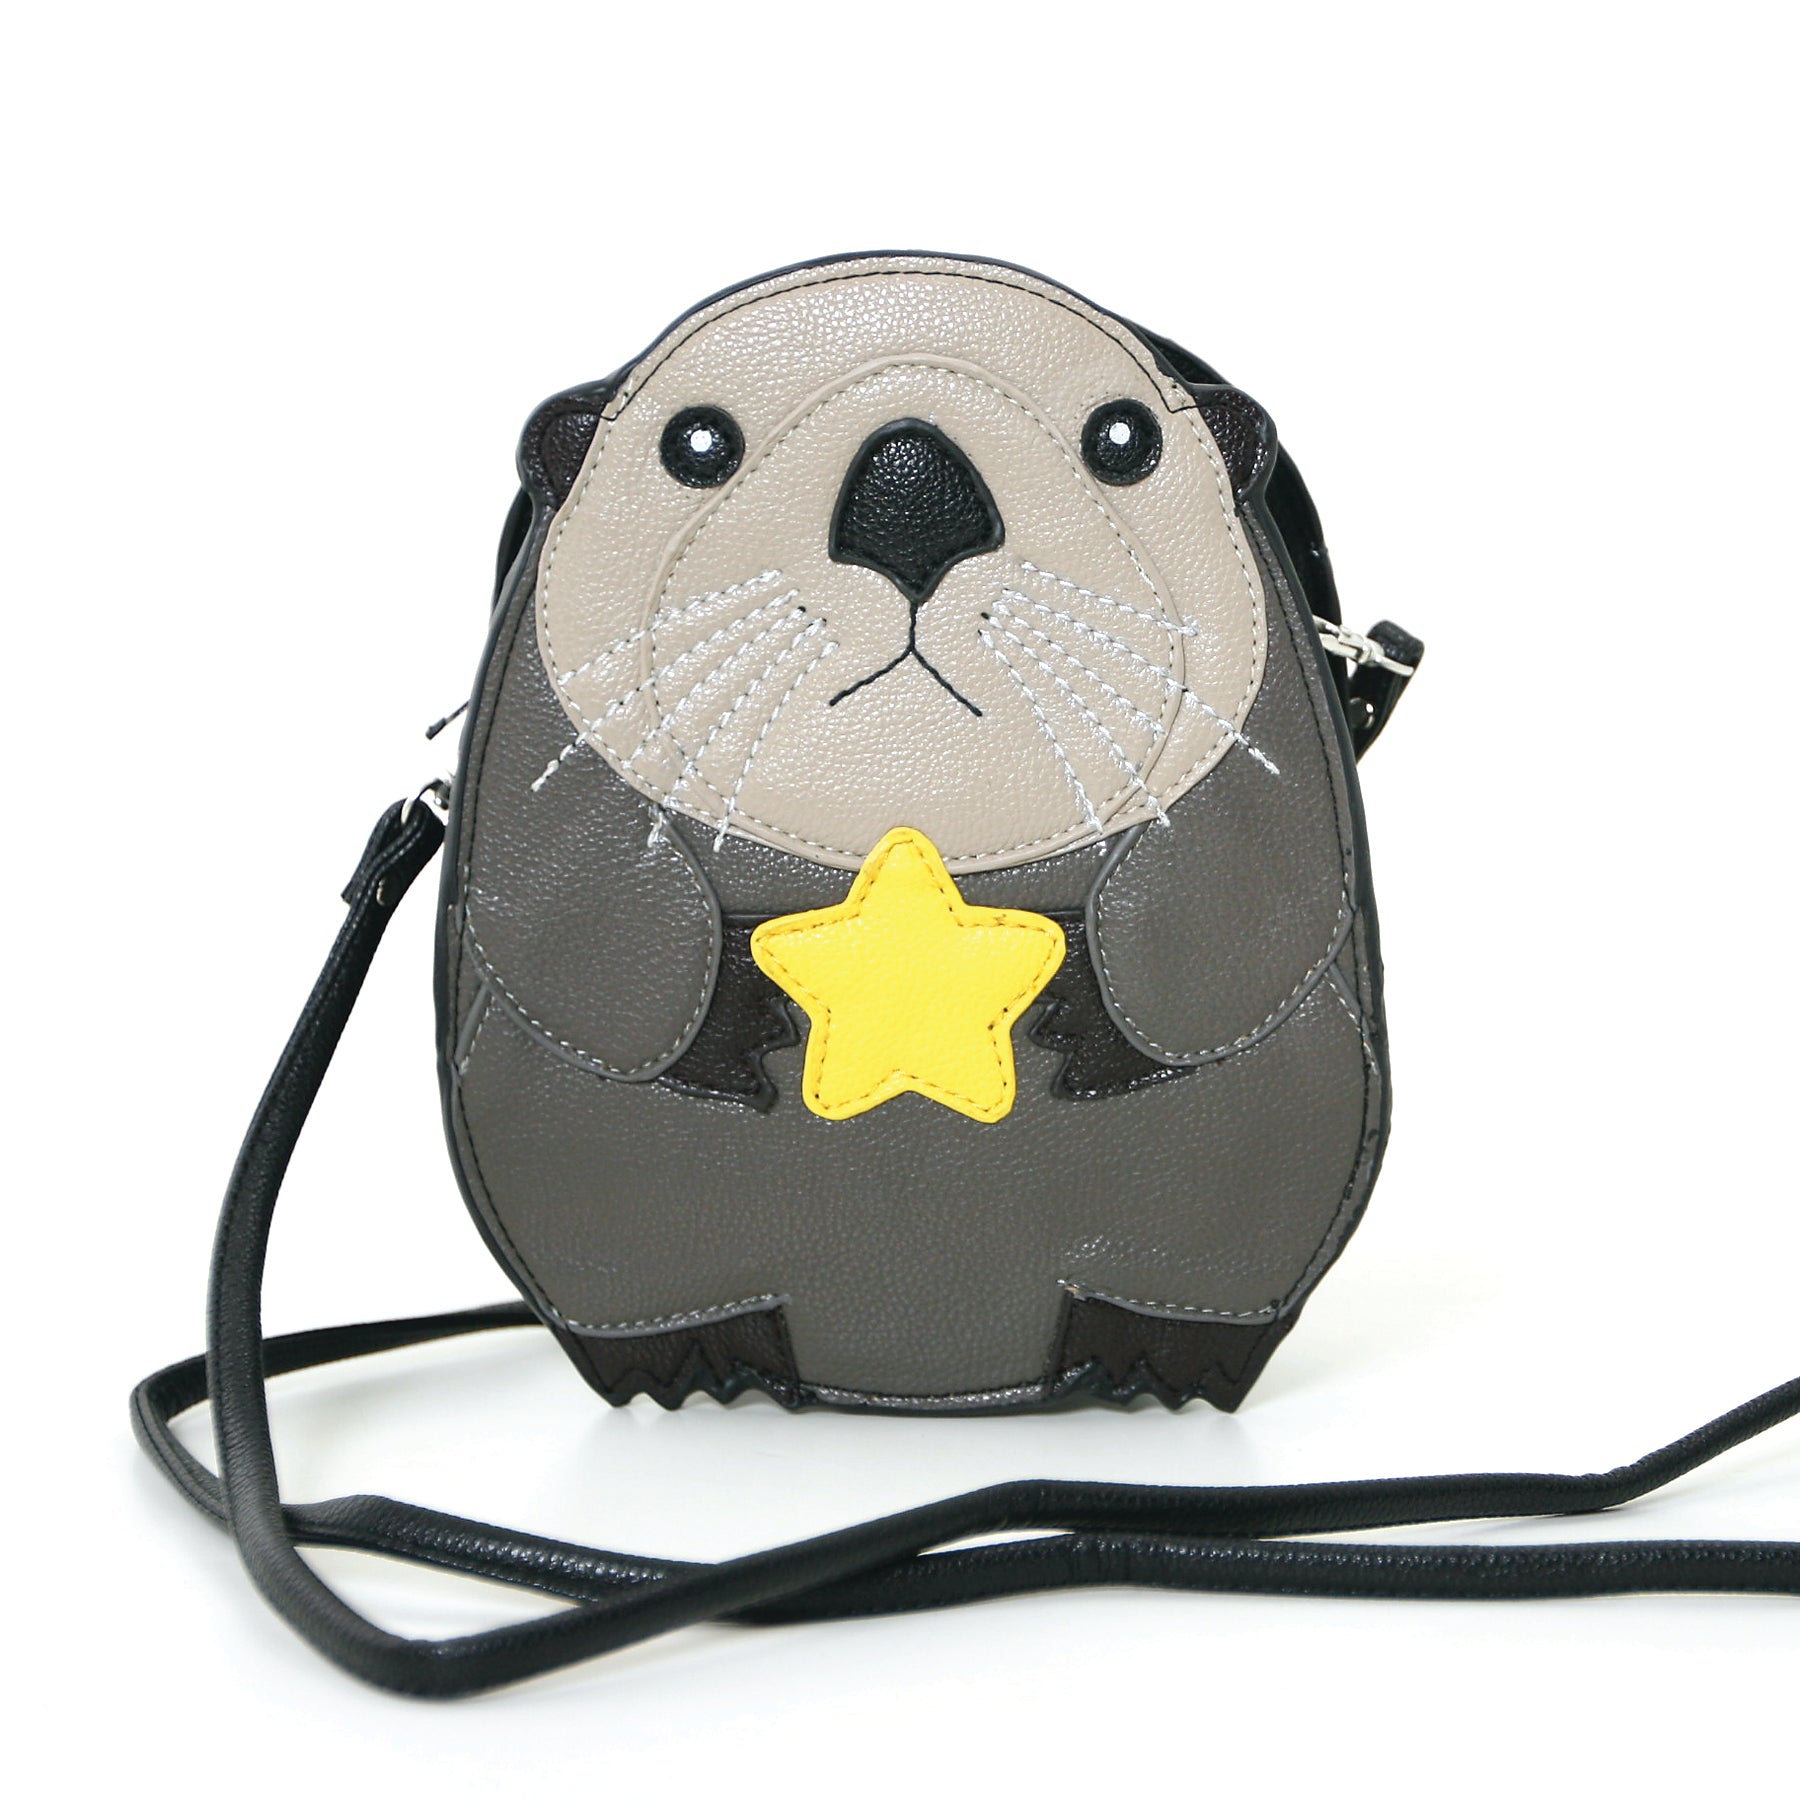 Sleepyville Critters Baby Beaver Holding a Star Shoulder Crossbody Bag in Vinyl Material front view